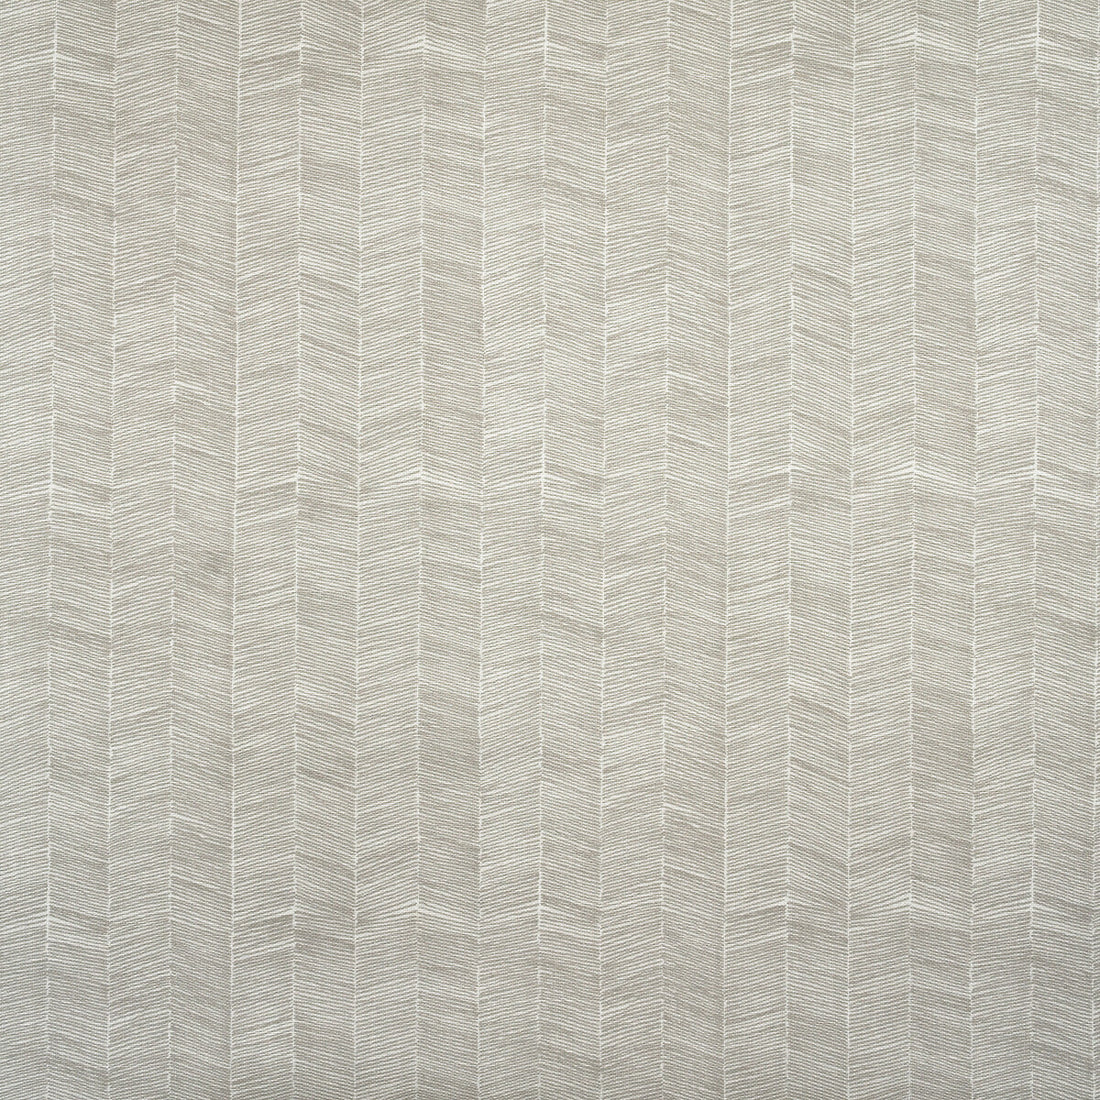 Delta Outdoor fabric in cloud color - pattern AM100347.11.0 - by Kravet Couture in the Andrew Martin The Great Outdoors collection